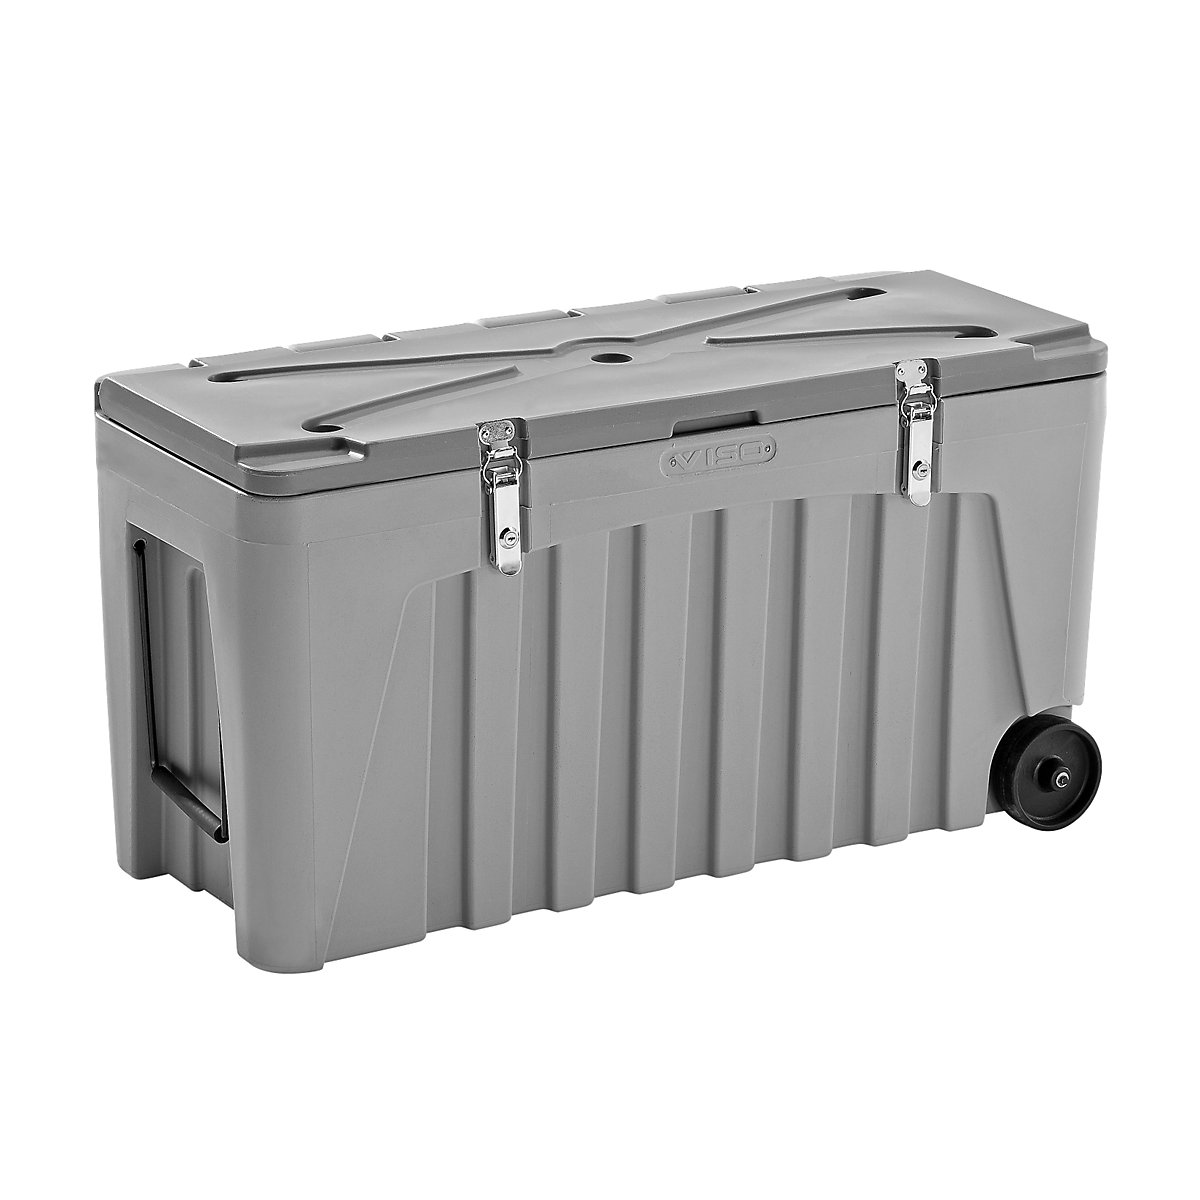 Universal container – VISO, made of polypropylene, with lock at the side, capacity 220 l-3